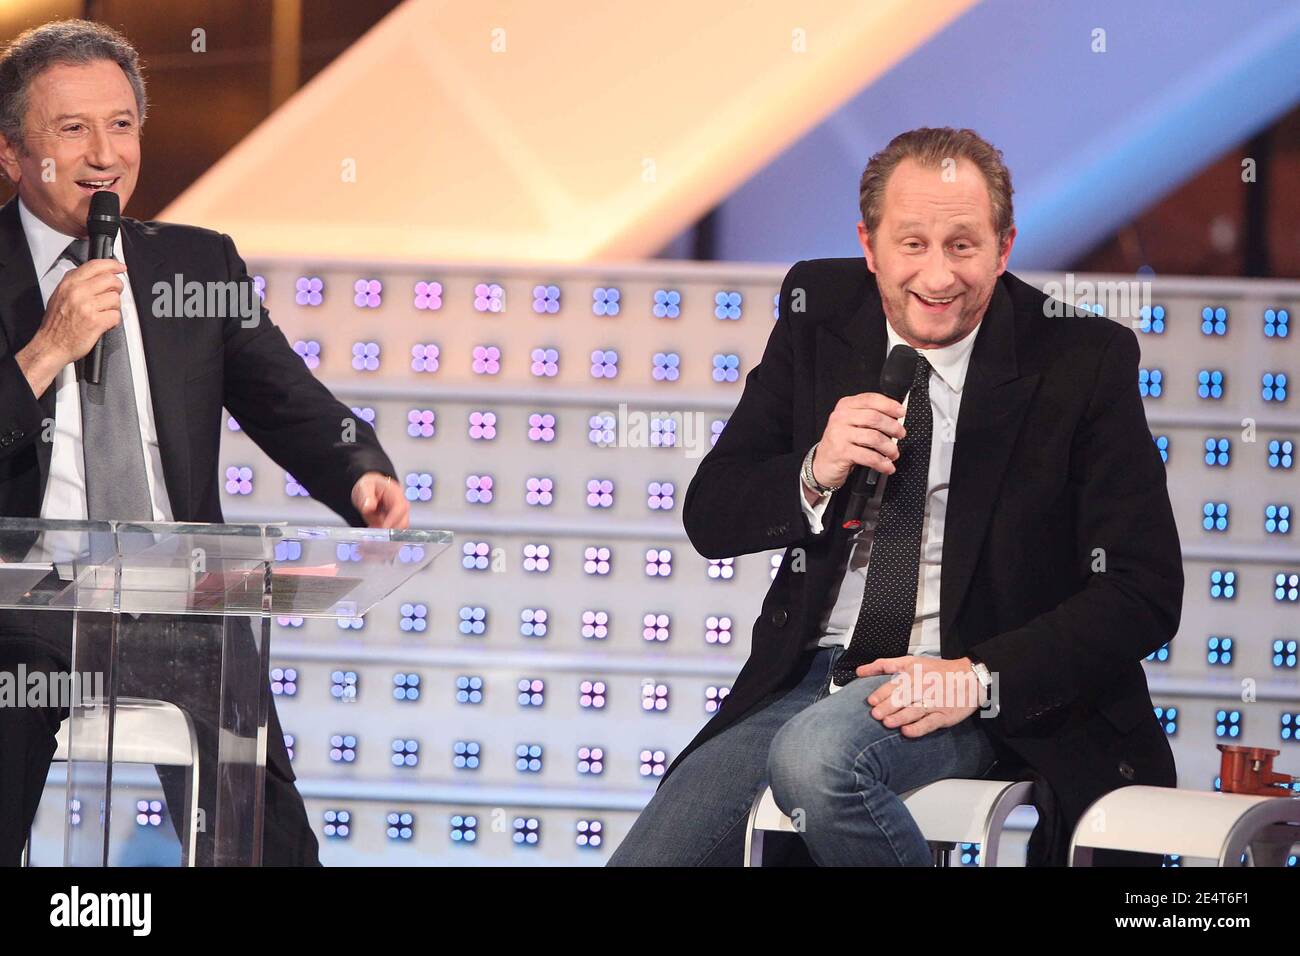 Michel Drucker and Benoit Poelvoorde at the taping of 'Tenue de soirée' on  March 15, 2008 in Brussels, Belgium. Photo by Max Colin/ABACAPRESS.COM  Stock Photo - Alamy